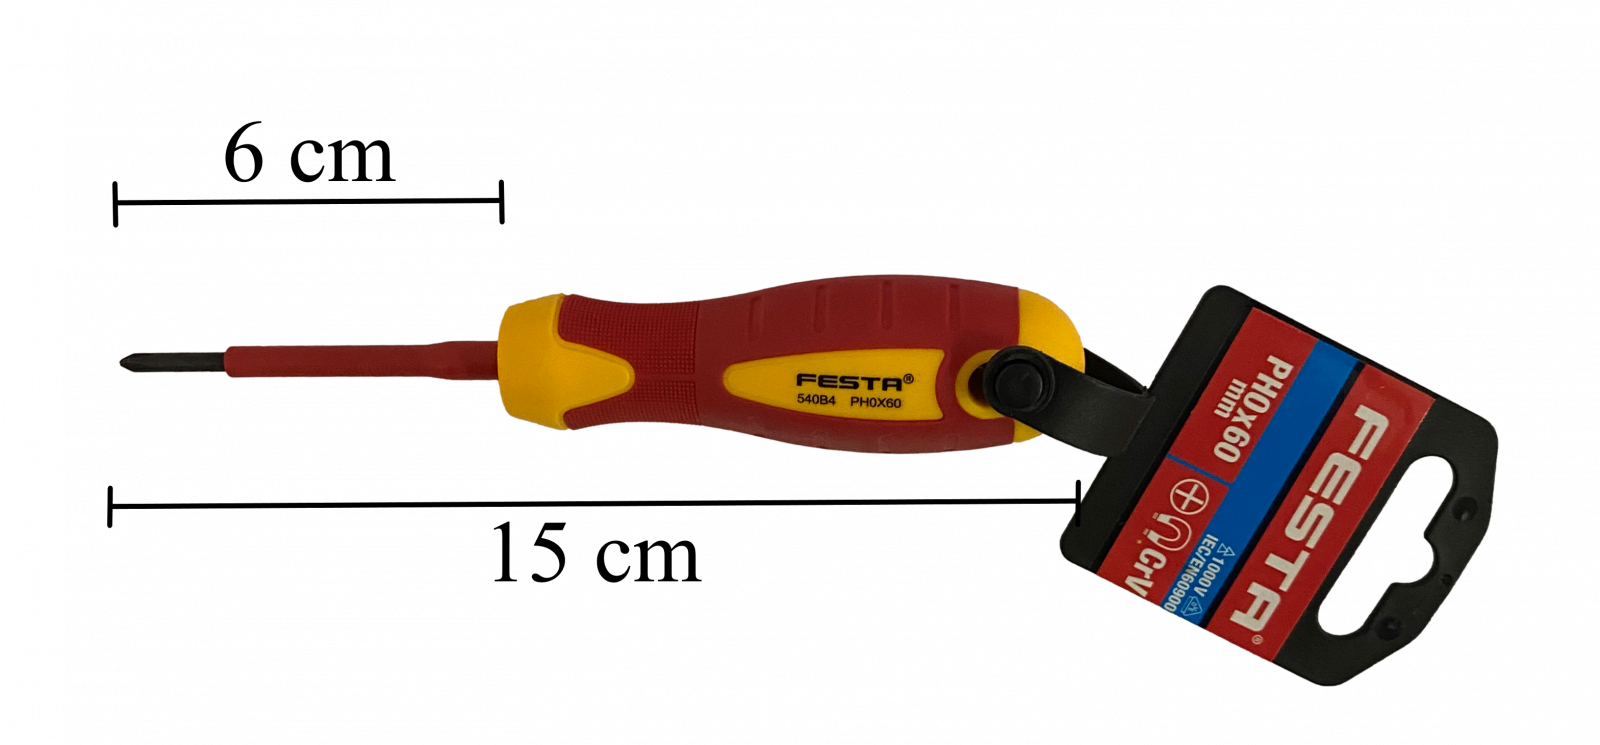 Electrician Screwdriver, PH 0x60MM OTHERS